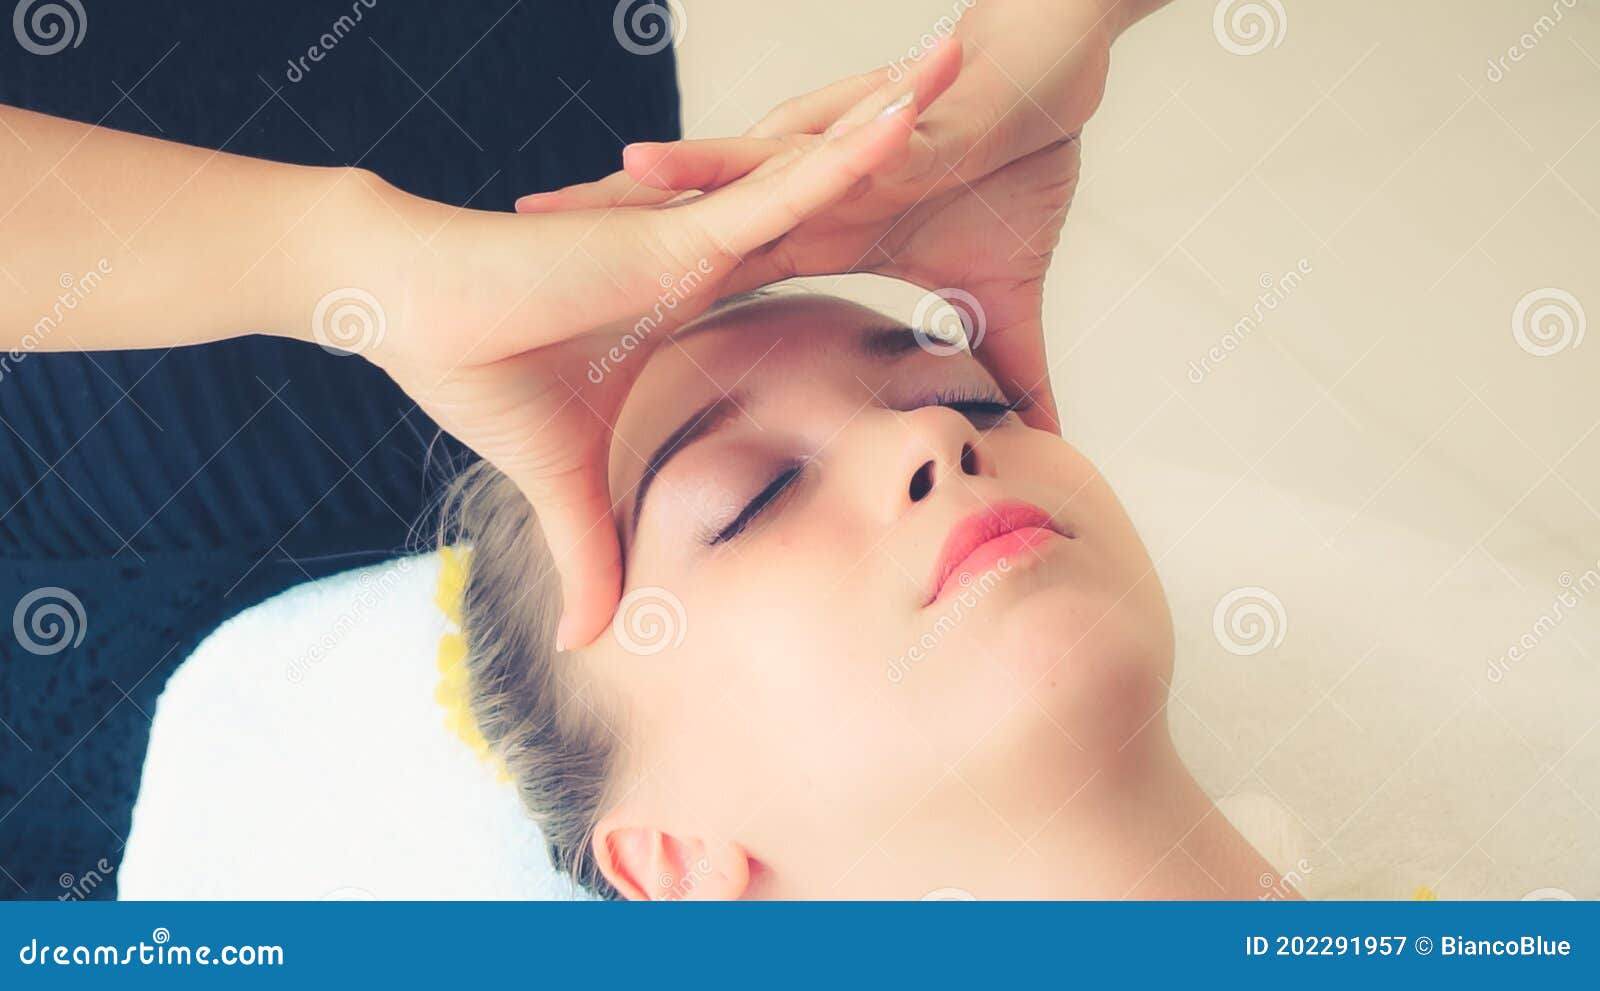 Woman Gets Facial And Head Massage In Luxury Spa Stock Image Image Of Nature Rejuvenate